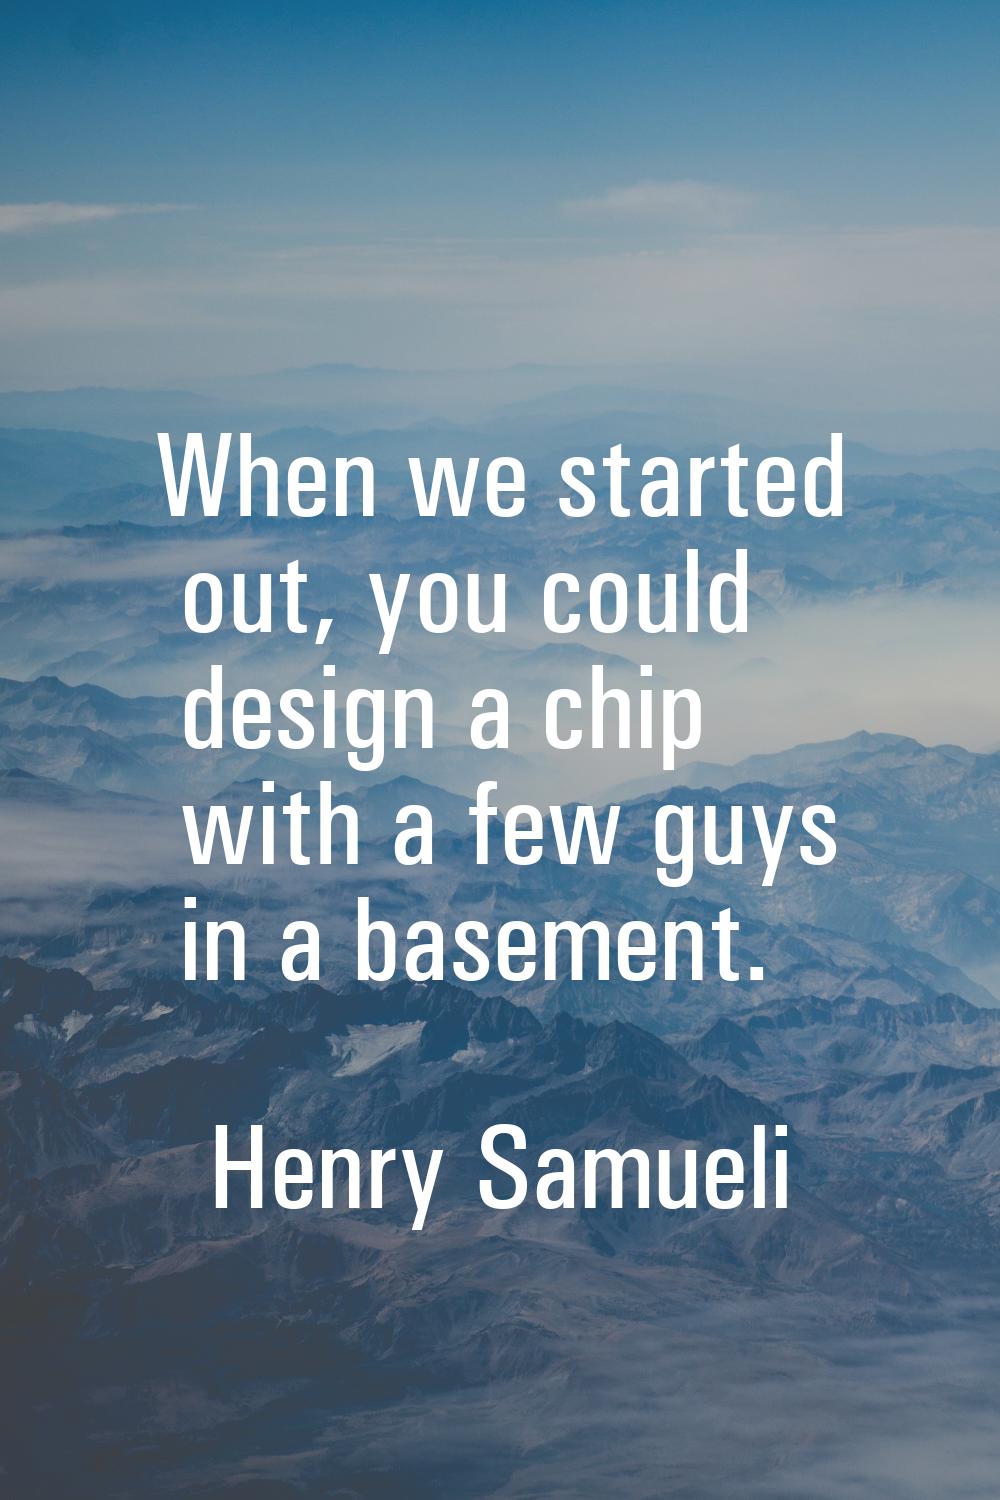 When we started out, you could design a chip with a few guys in a basement.